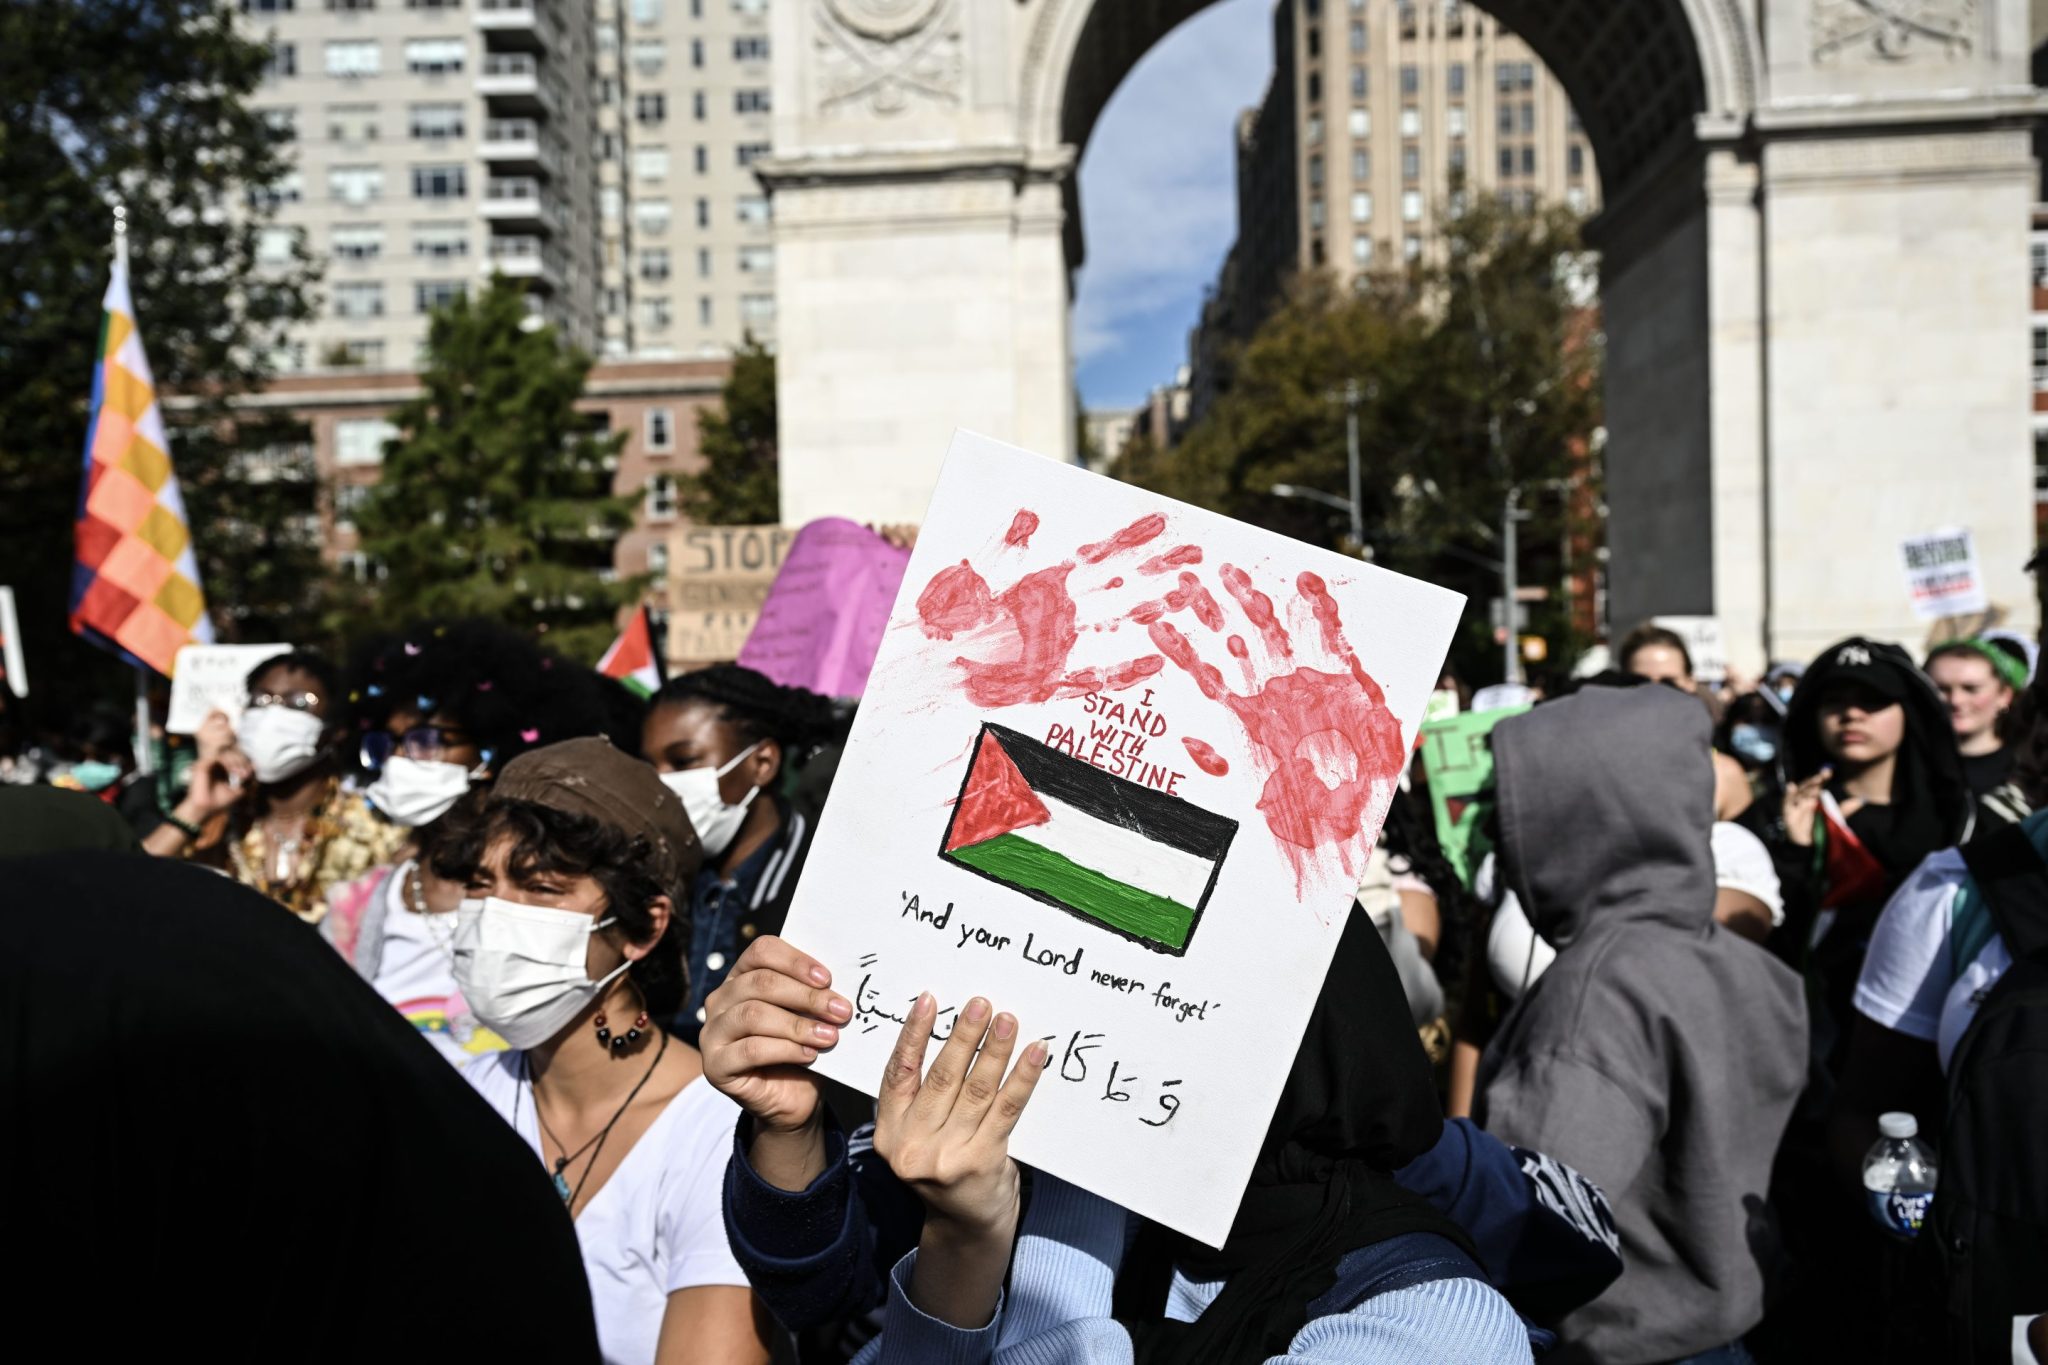 NYU students sue school over ‘deliberate indifference’ to antisemitism that they say has soared since the Israel-Hamas war